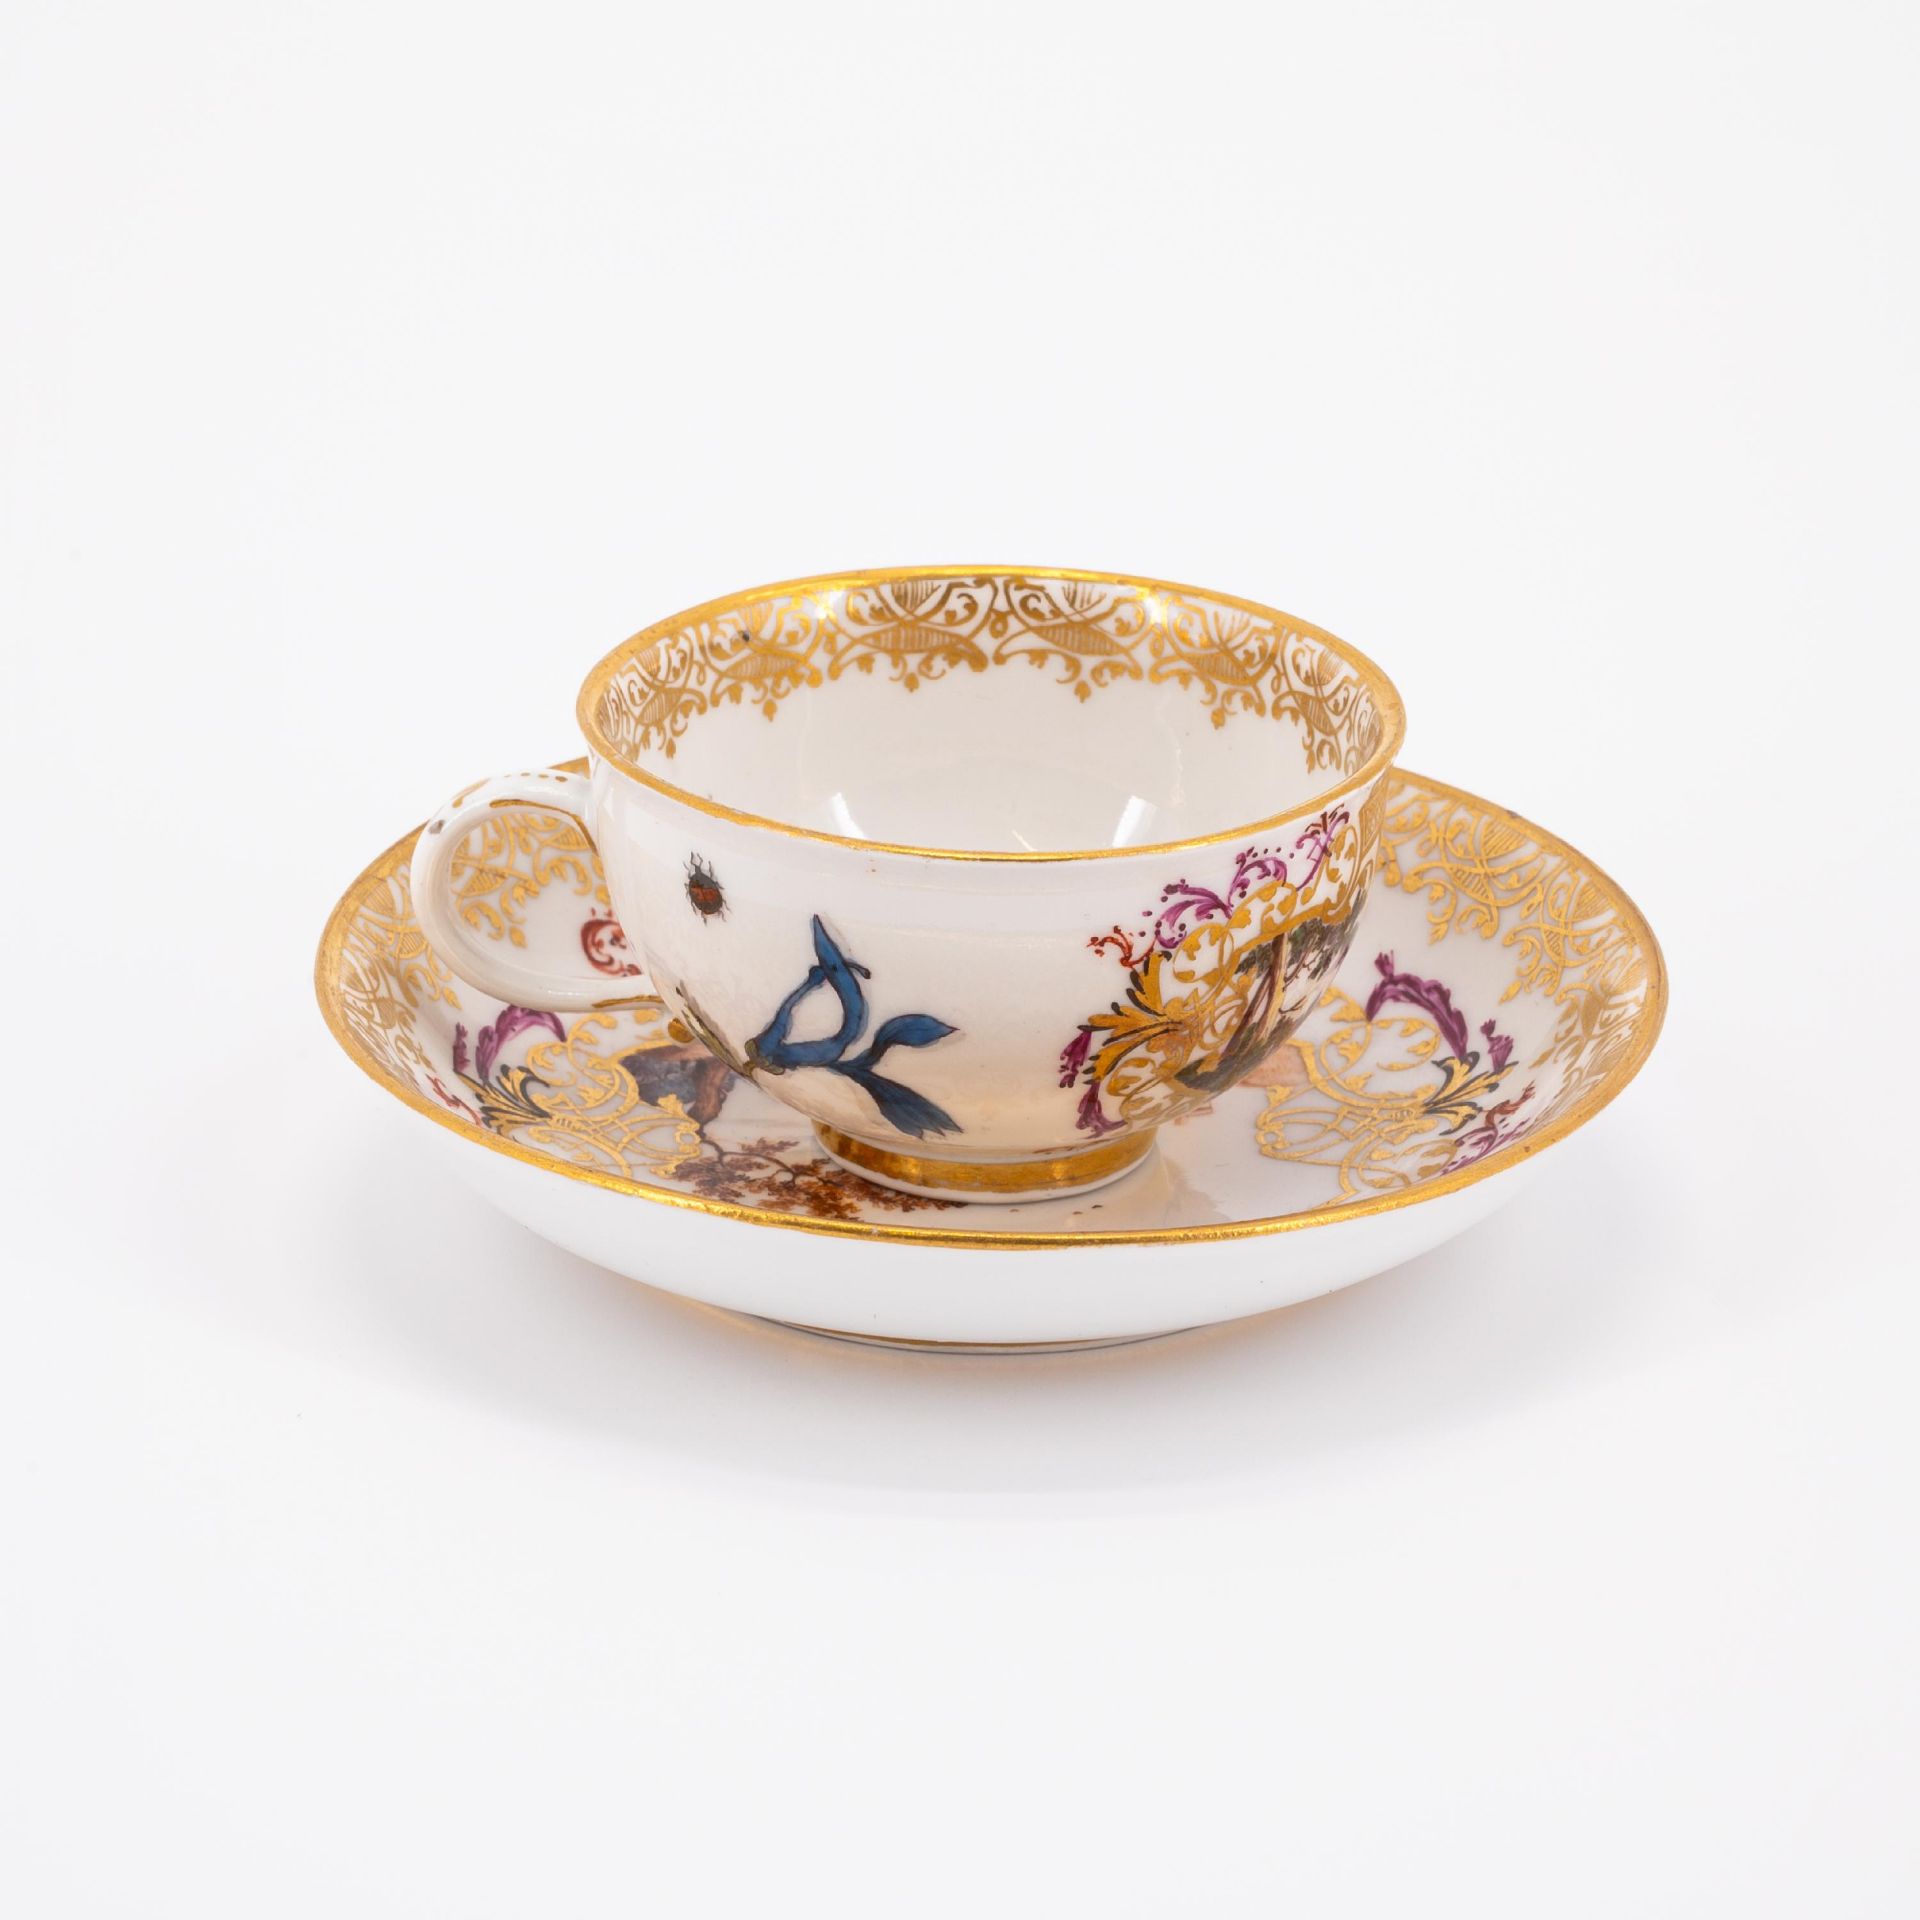 Meissen: CUP AND SAUCER WITH LARGE GOLD CARTOUCHES AND HUNTING SCENES - Image 4 of 6